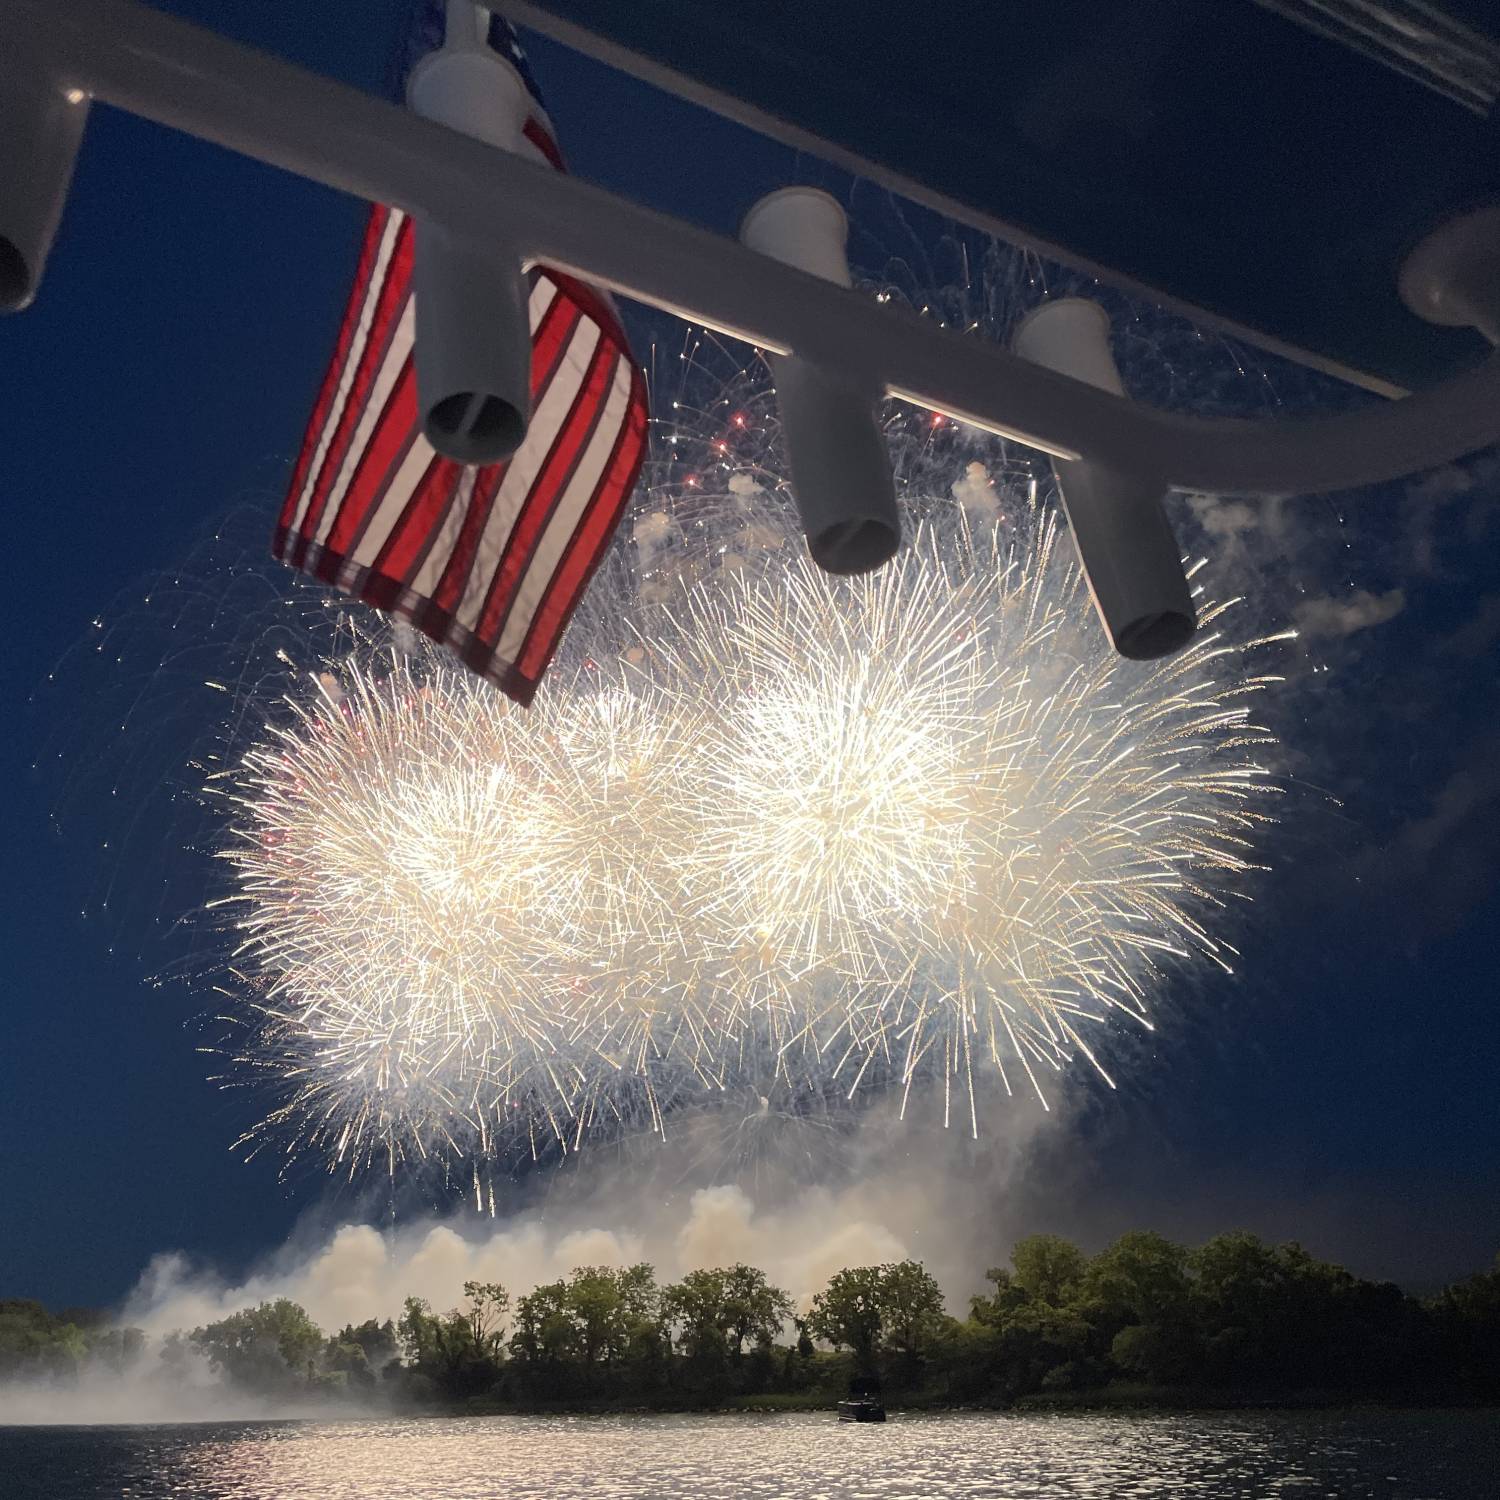 Title: And the Rocket Launchers Red Glare - On board their Sportsman Open 232 Center Console - Location: Jefferson Patterson Park on Patuxent River, Maryland. Participating in the Photo Contest #SportsmanJune2023